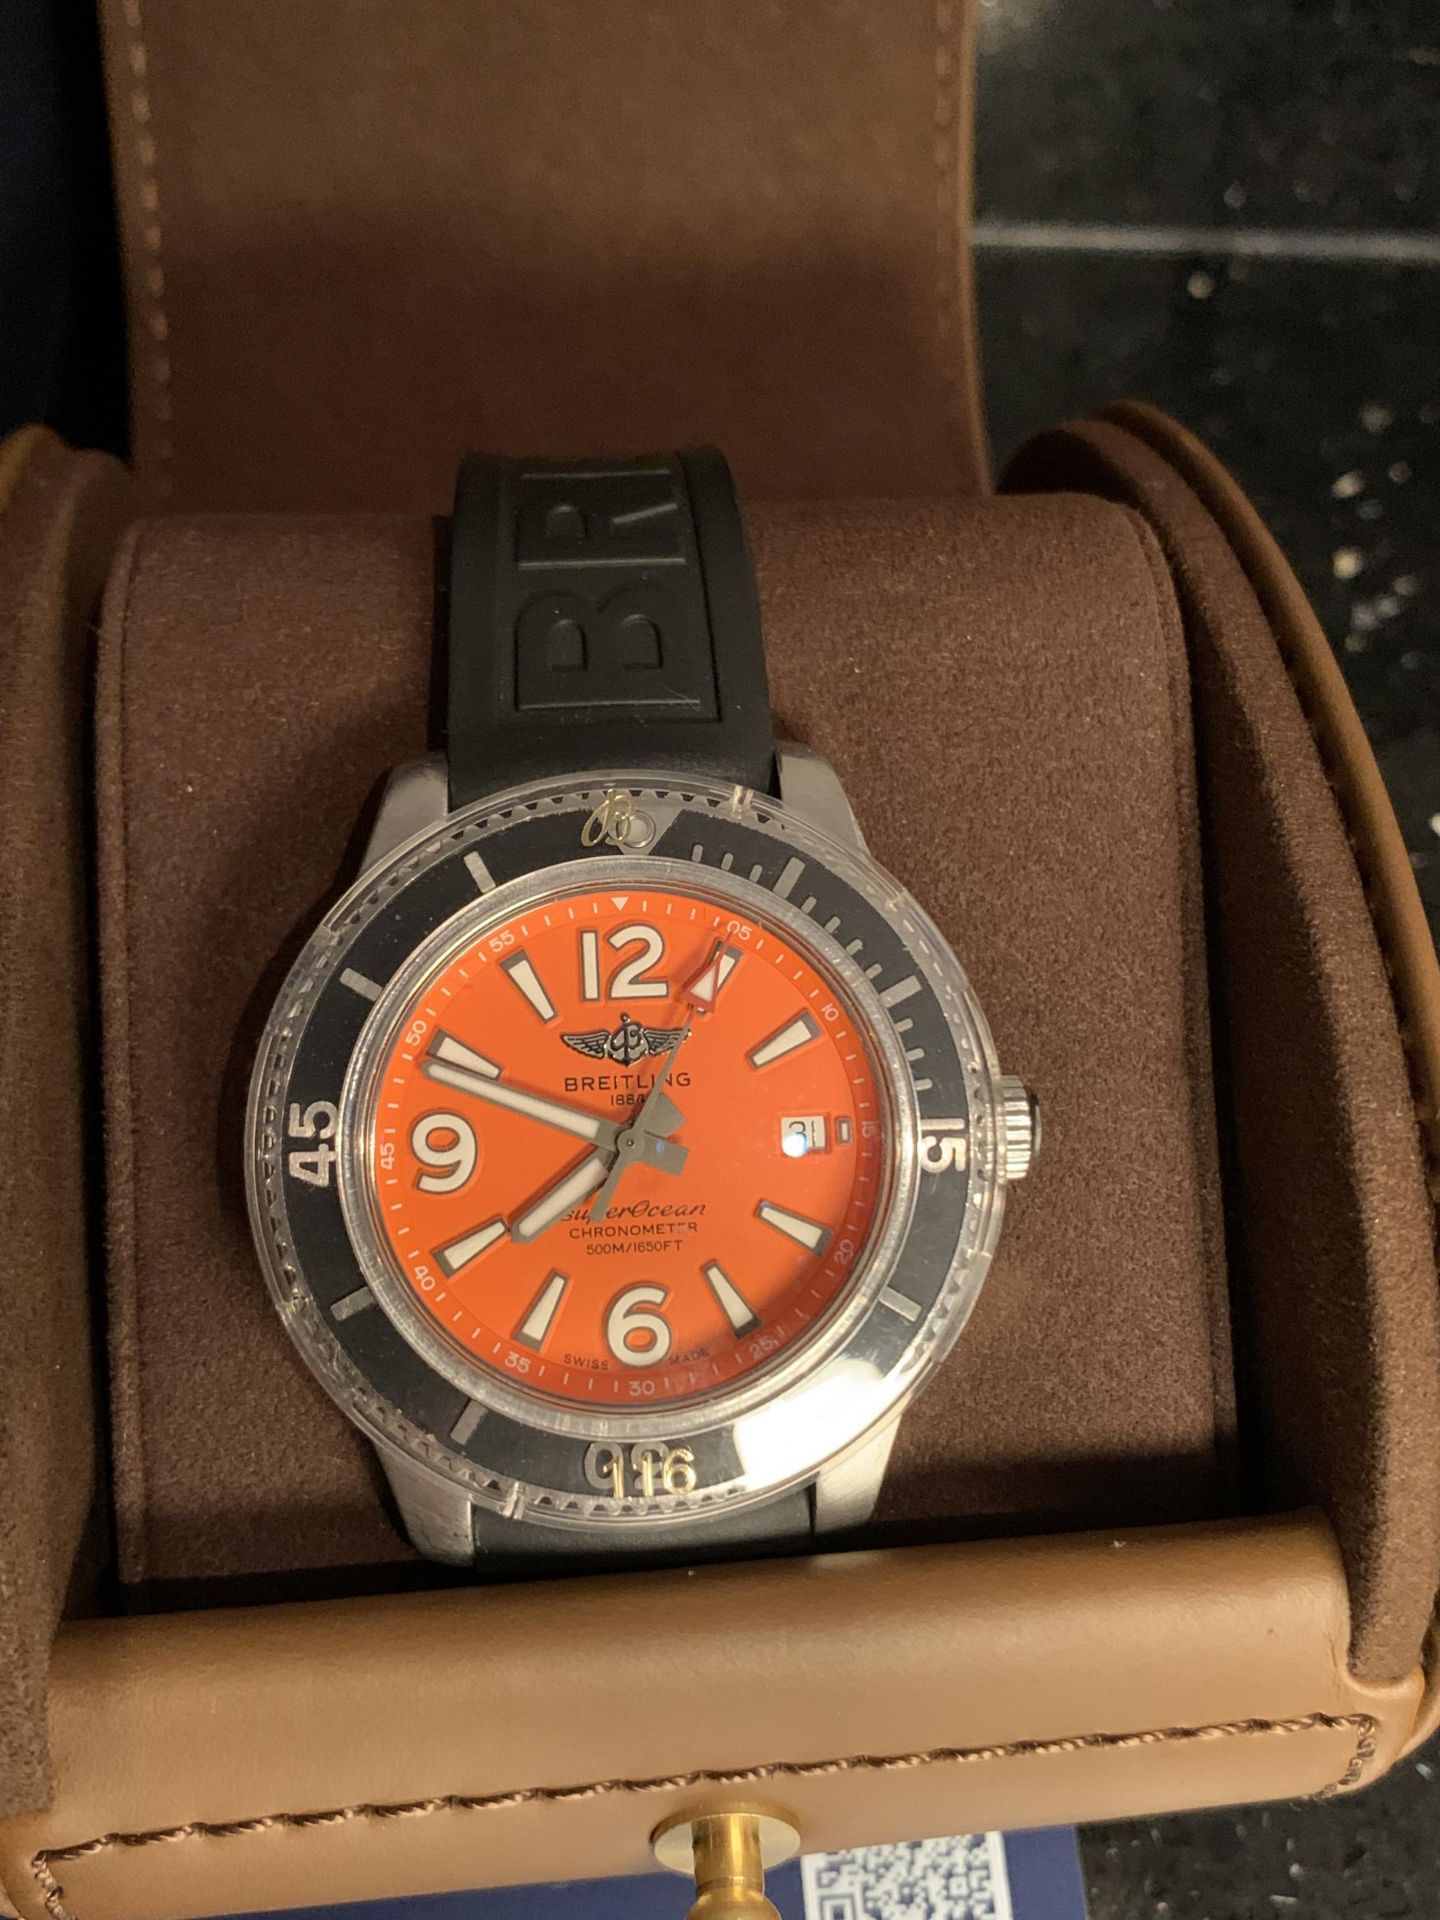 A BREITLING SUPEROCEAN AUTOMATIC 42 SERIAL NUMBER 6233918 WRIST WATCH WITH ORIGINAL BOX, CARD AND - Image 2 of 8